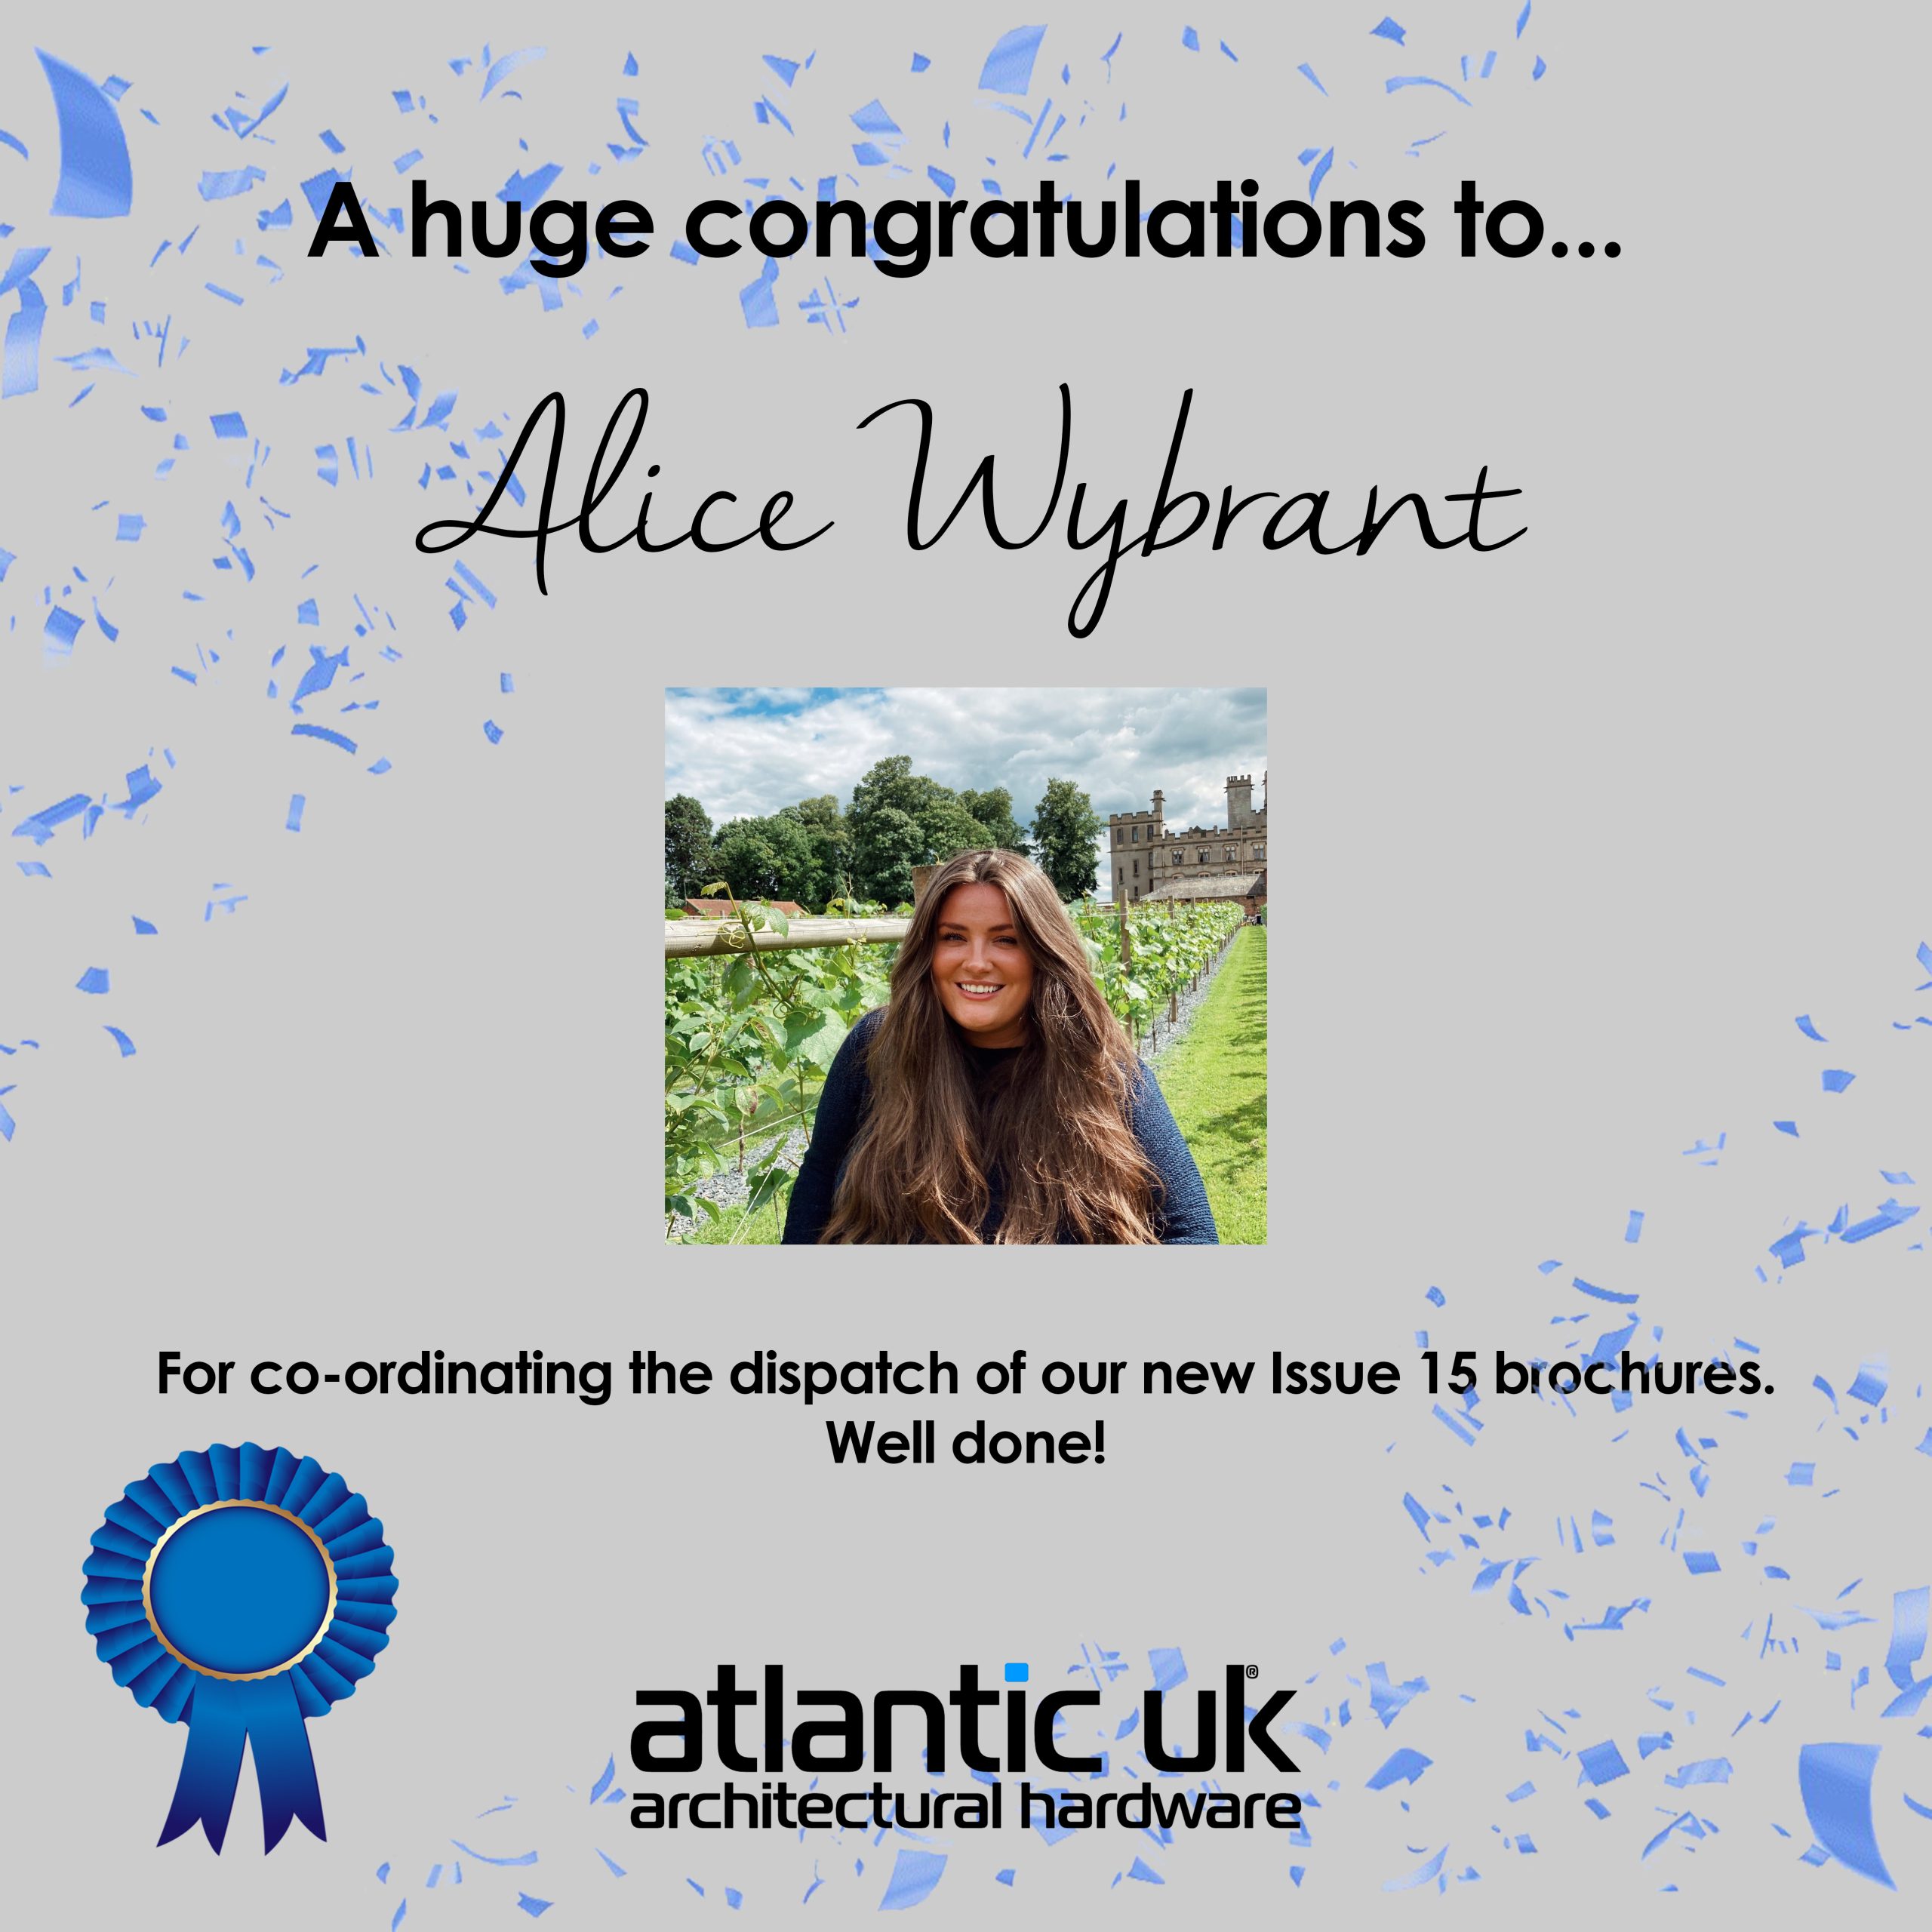 Congratulations Alice! Employee of the Month for July!